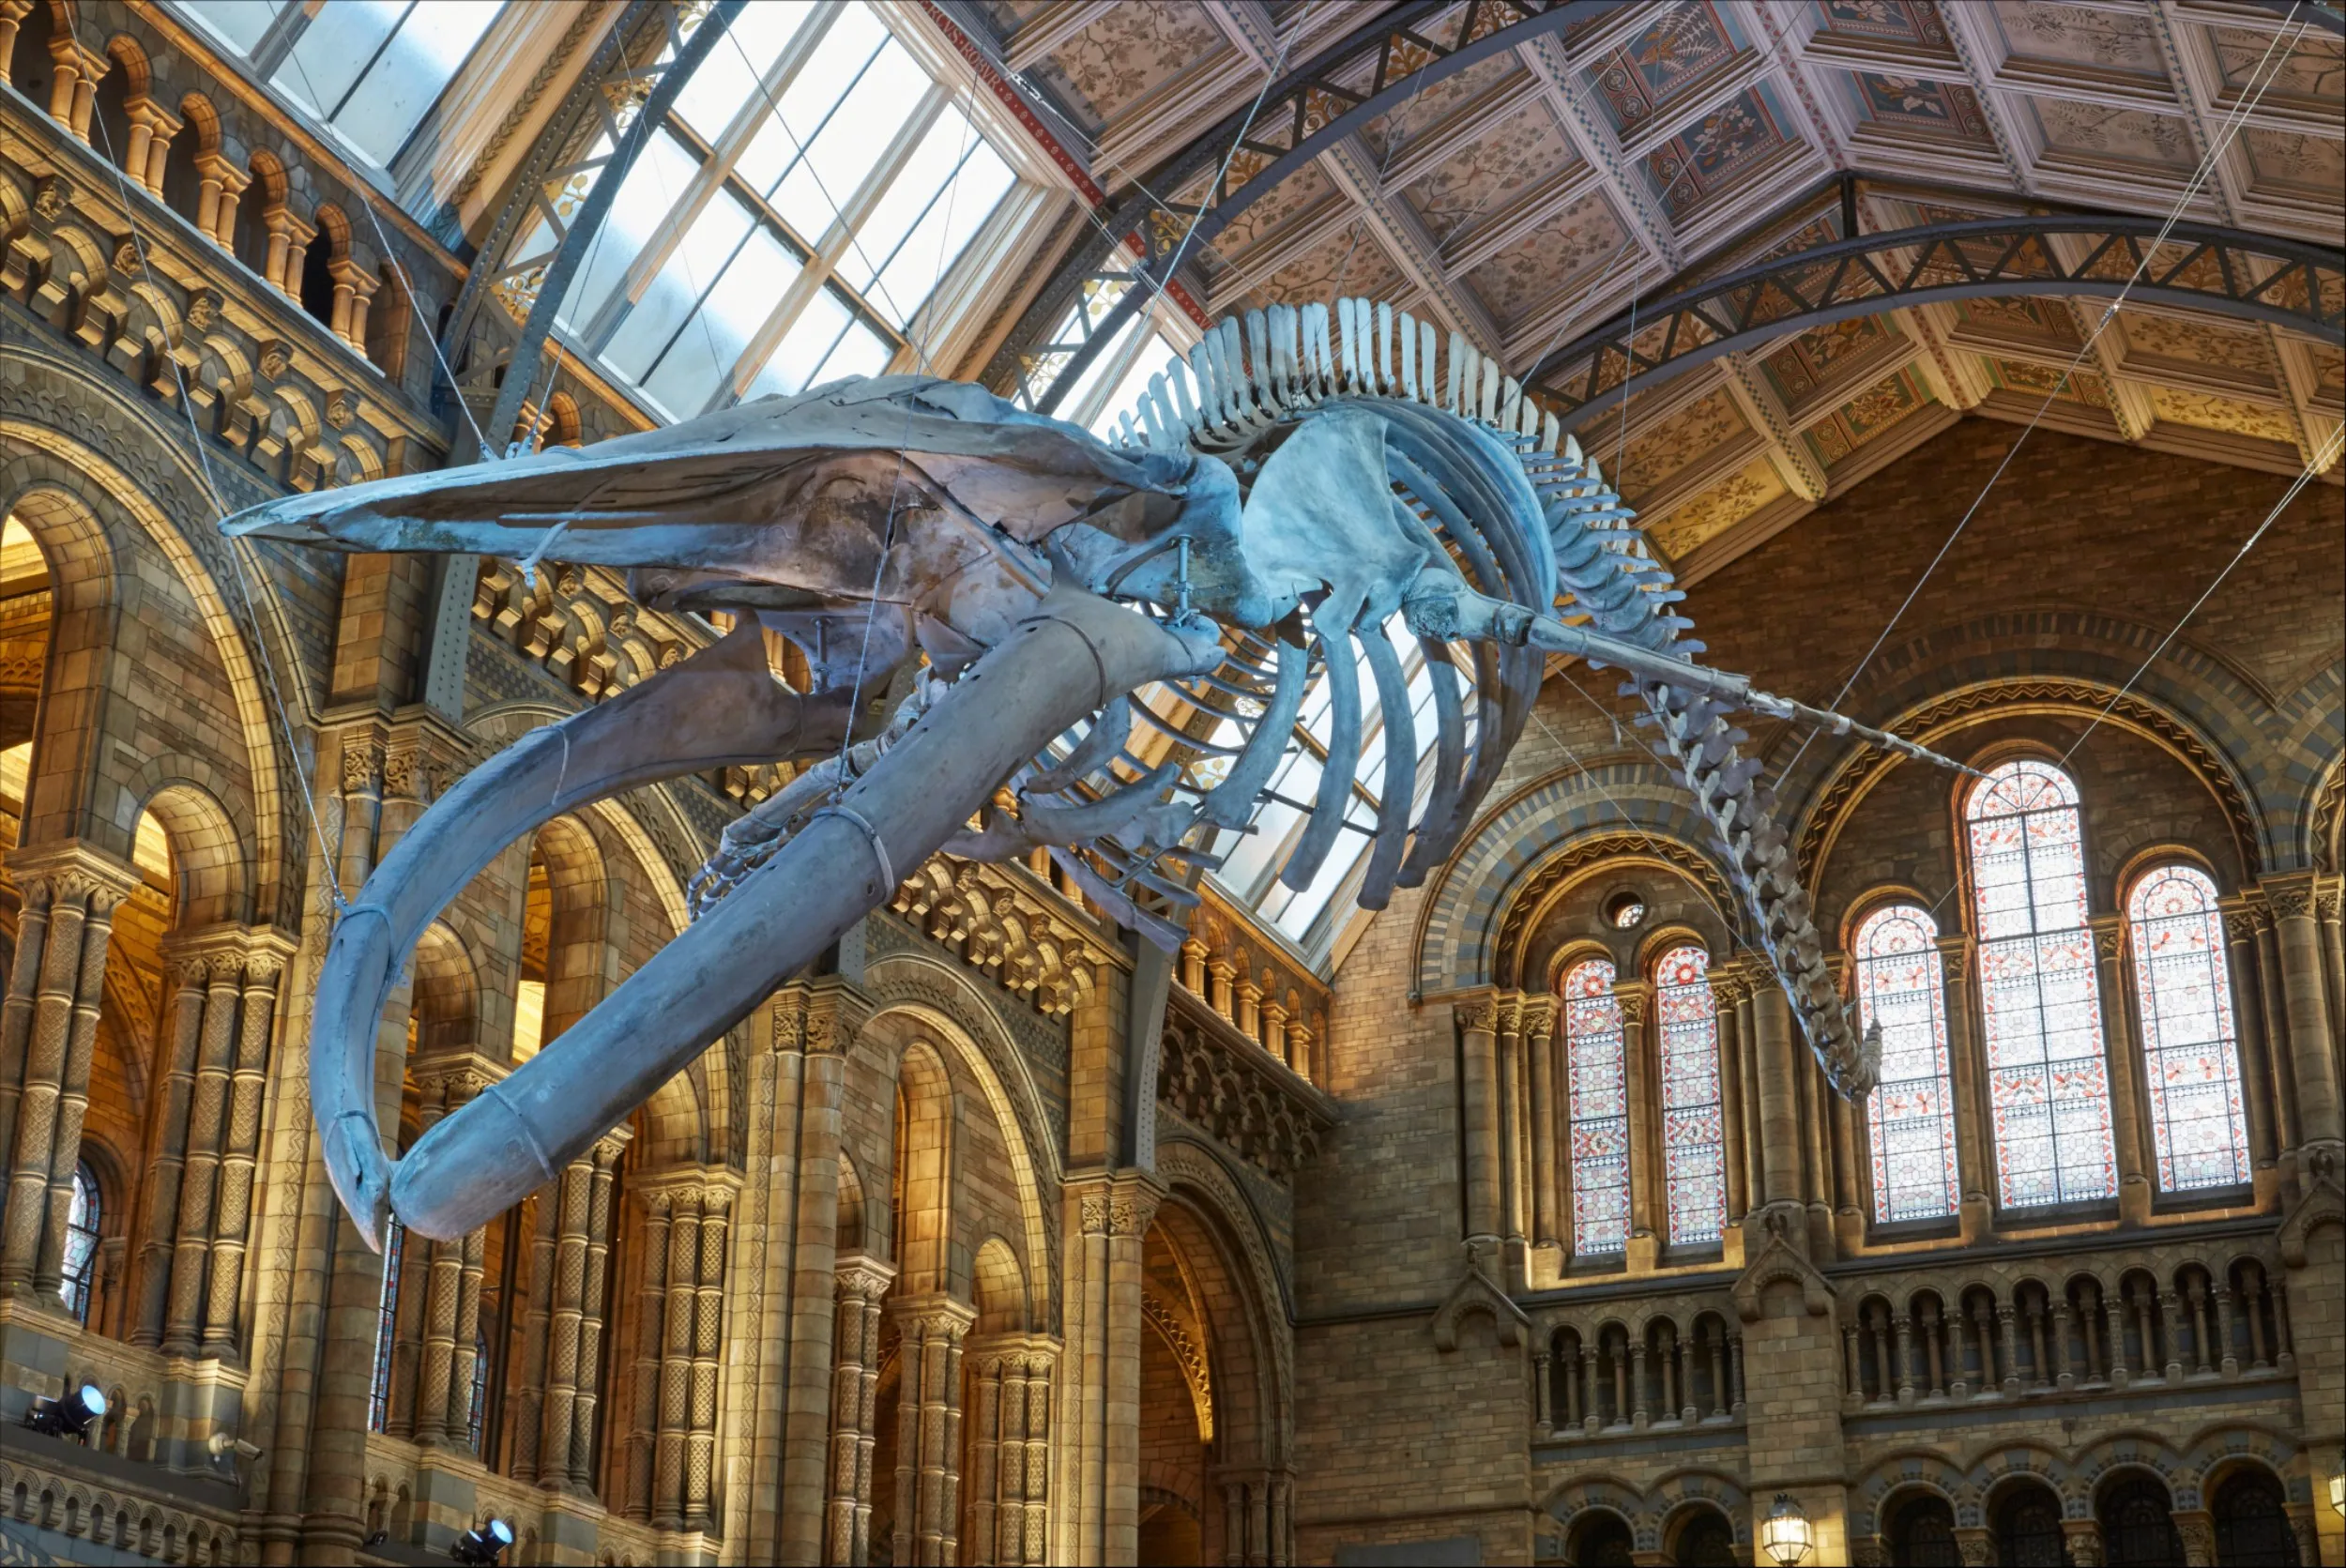 A Blue Whale skeleton suspended from the ceiling of the Hintze Hall at the Natural History Museum, London.